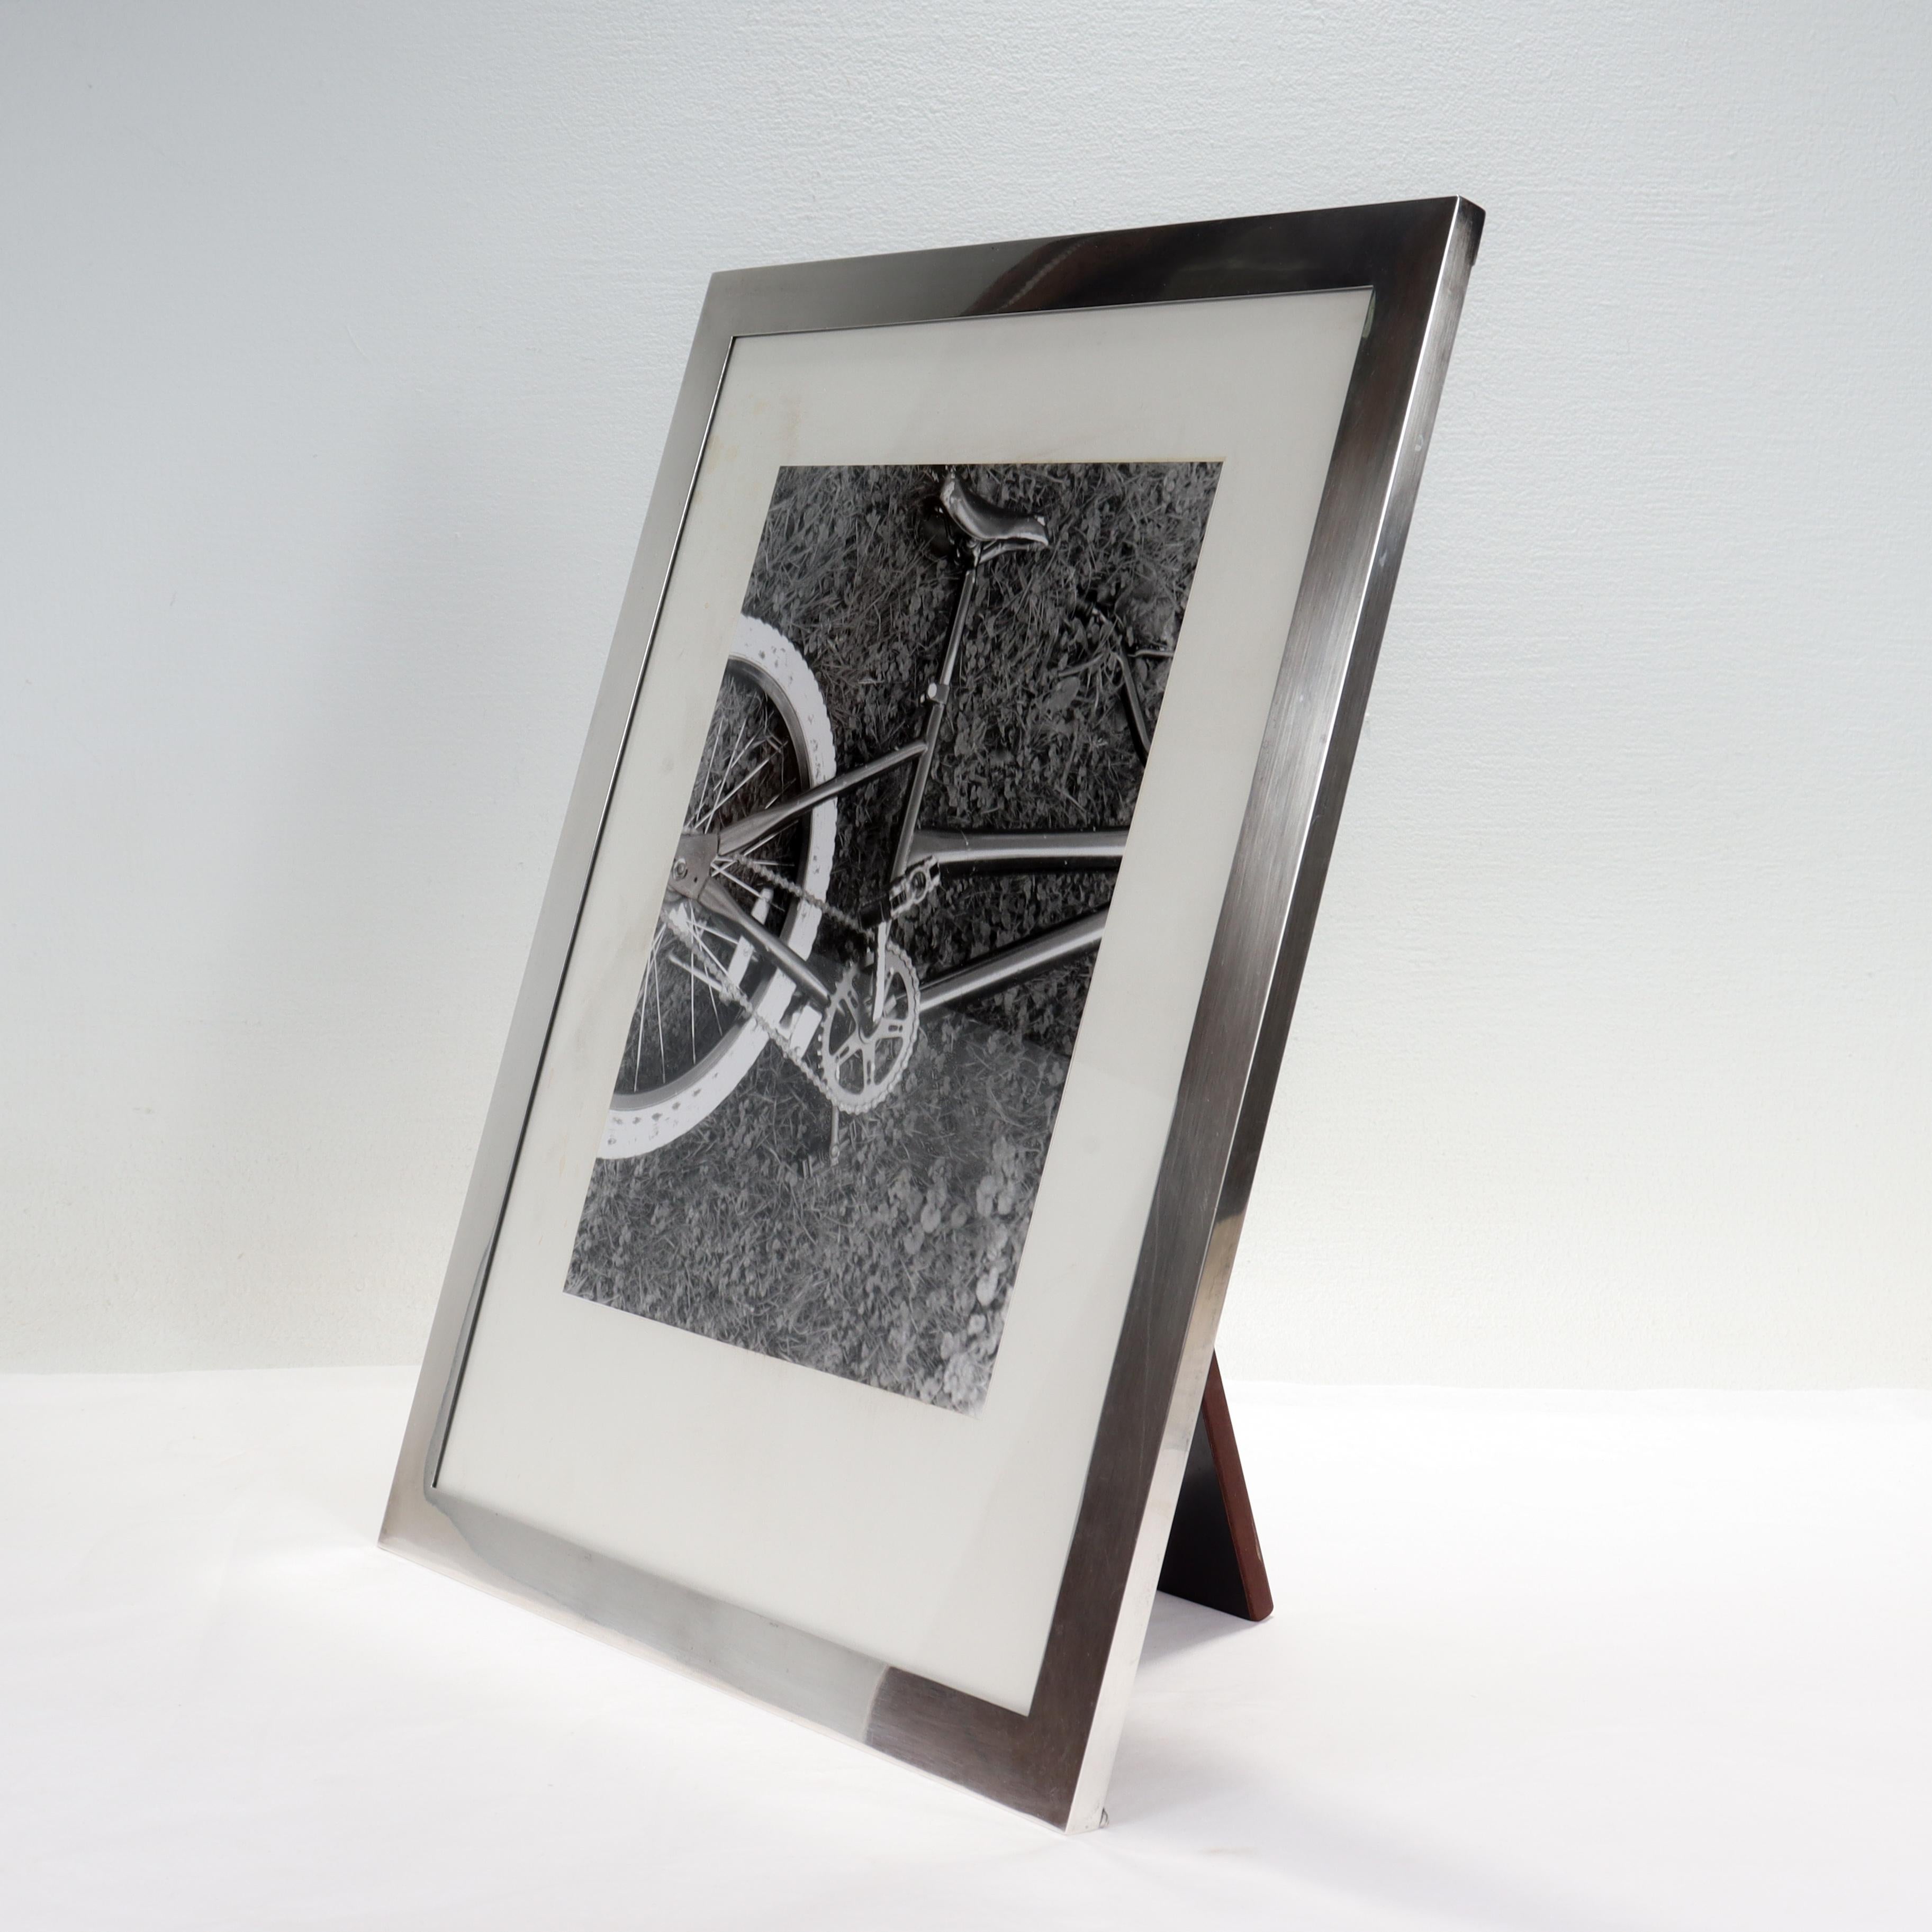 A large American Art Deco silver picture or photo frame.

In sterling silver.

By Lebkucher & Co. 

With a masonite easel back.

Marked to the base with Lebkucher's mark / Sterling / 3011 / Hand Made.

Simply a wonderful sterling silver picture